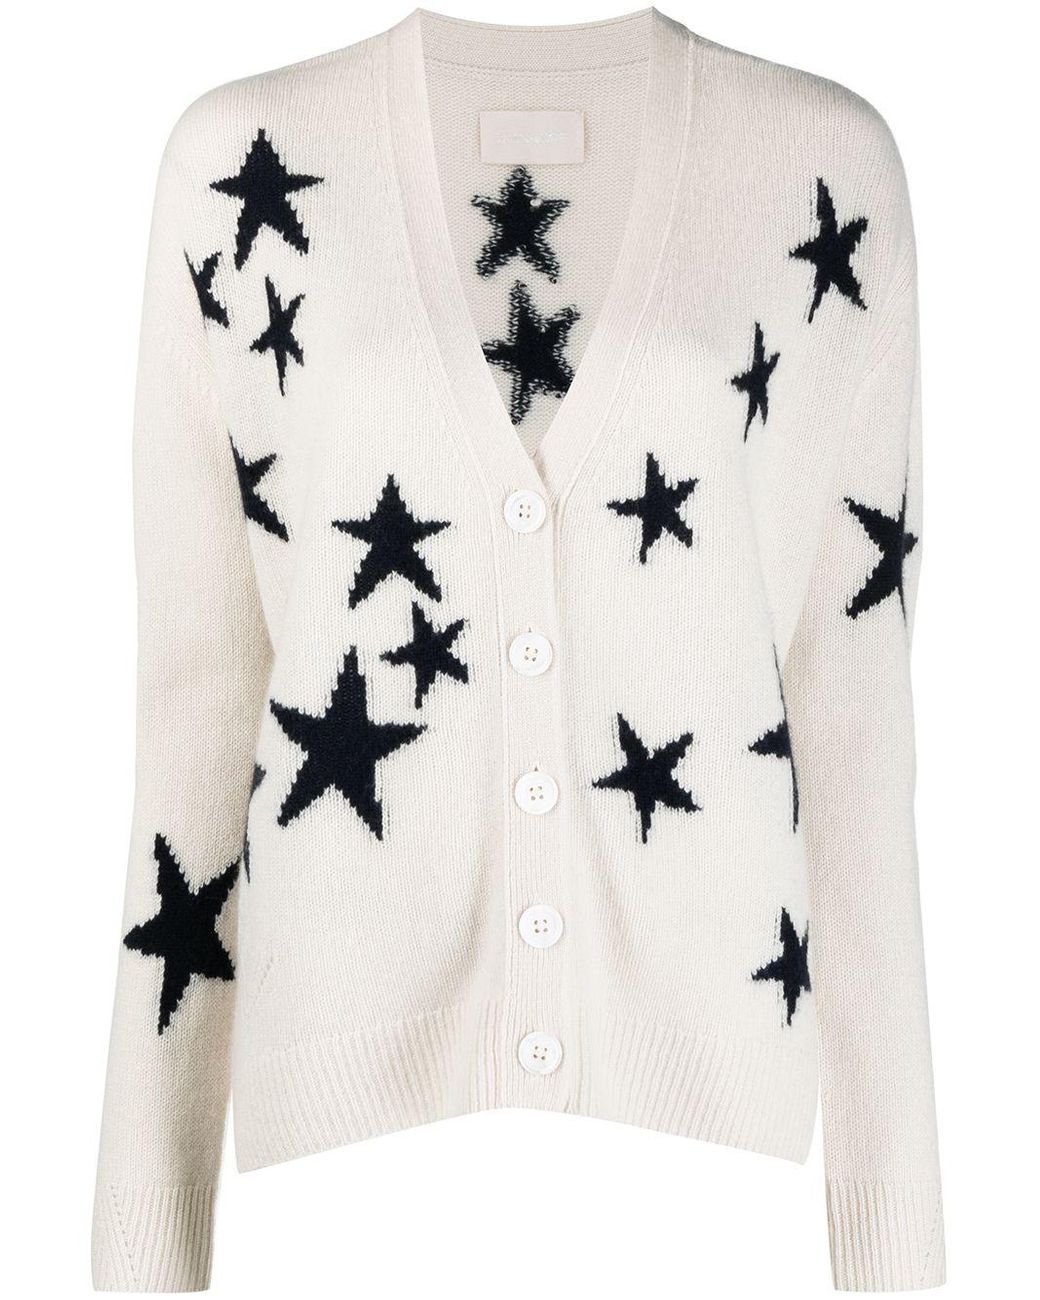 Zadig & Voltaire Mirka Star-knit Cashmere Cardigan in Natural - Lyst